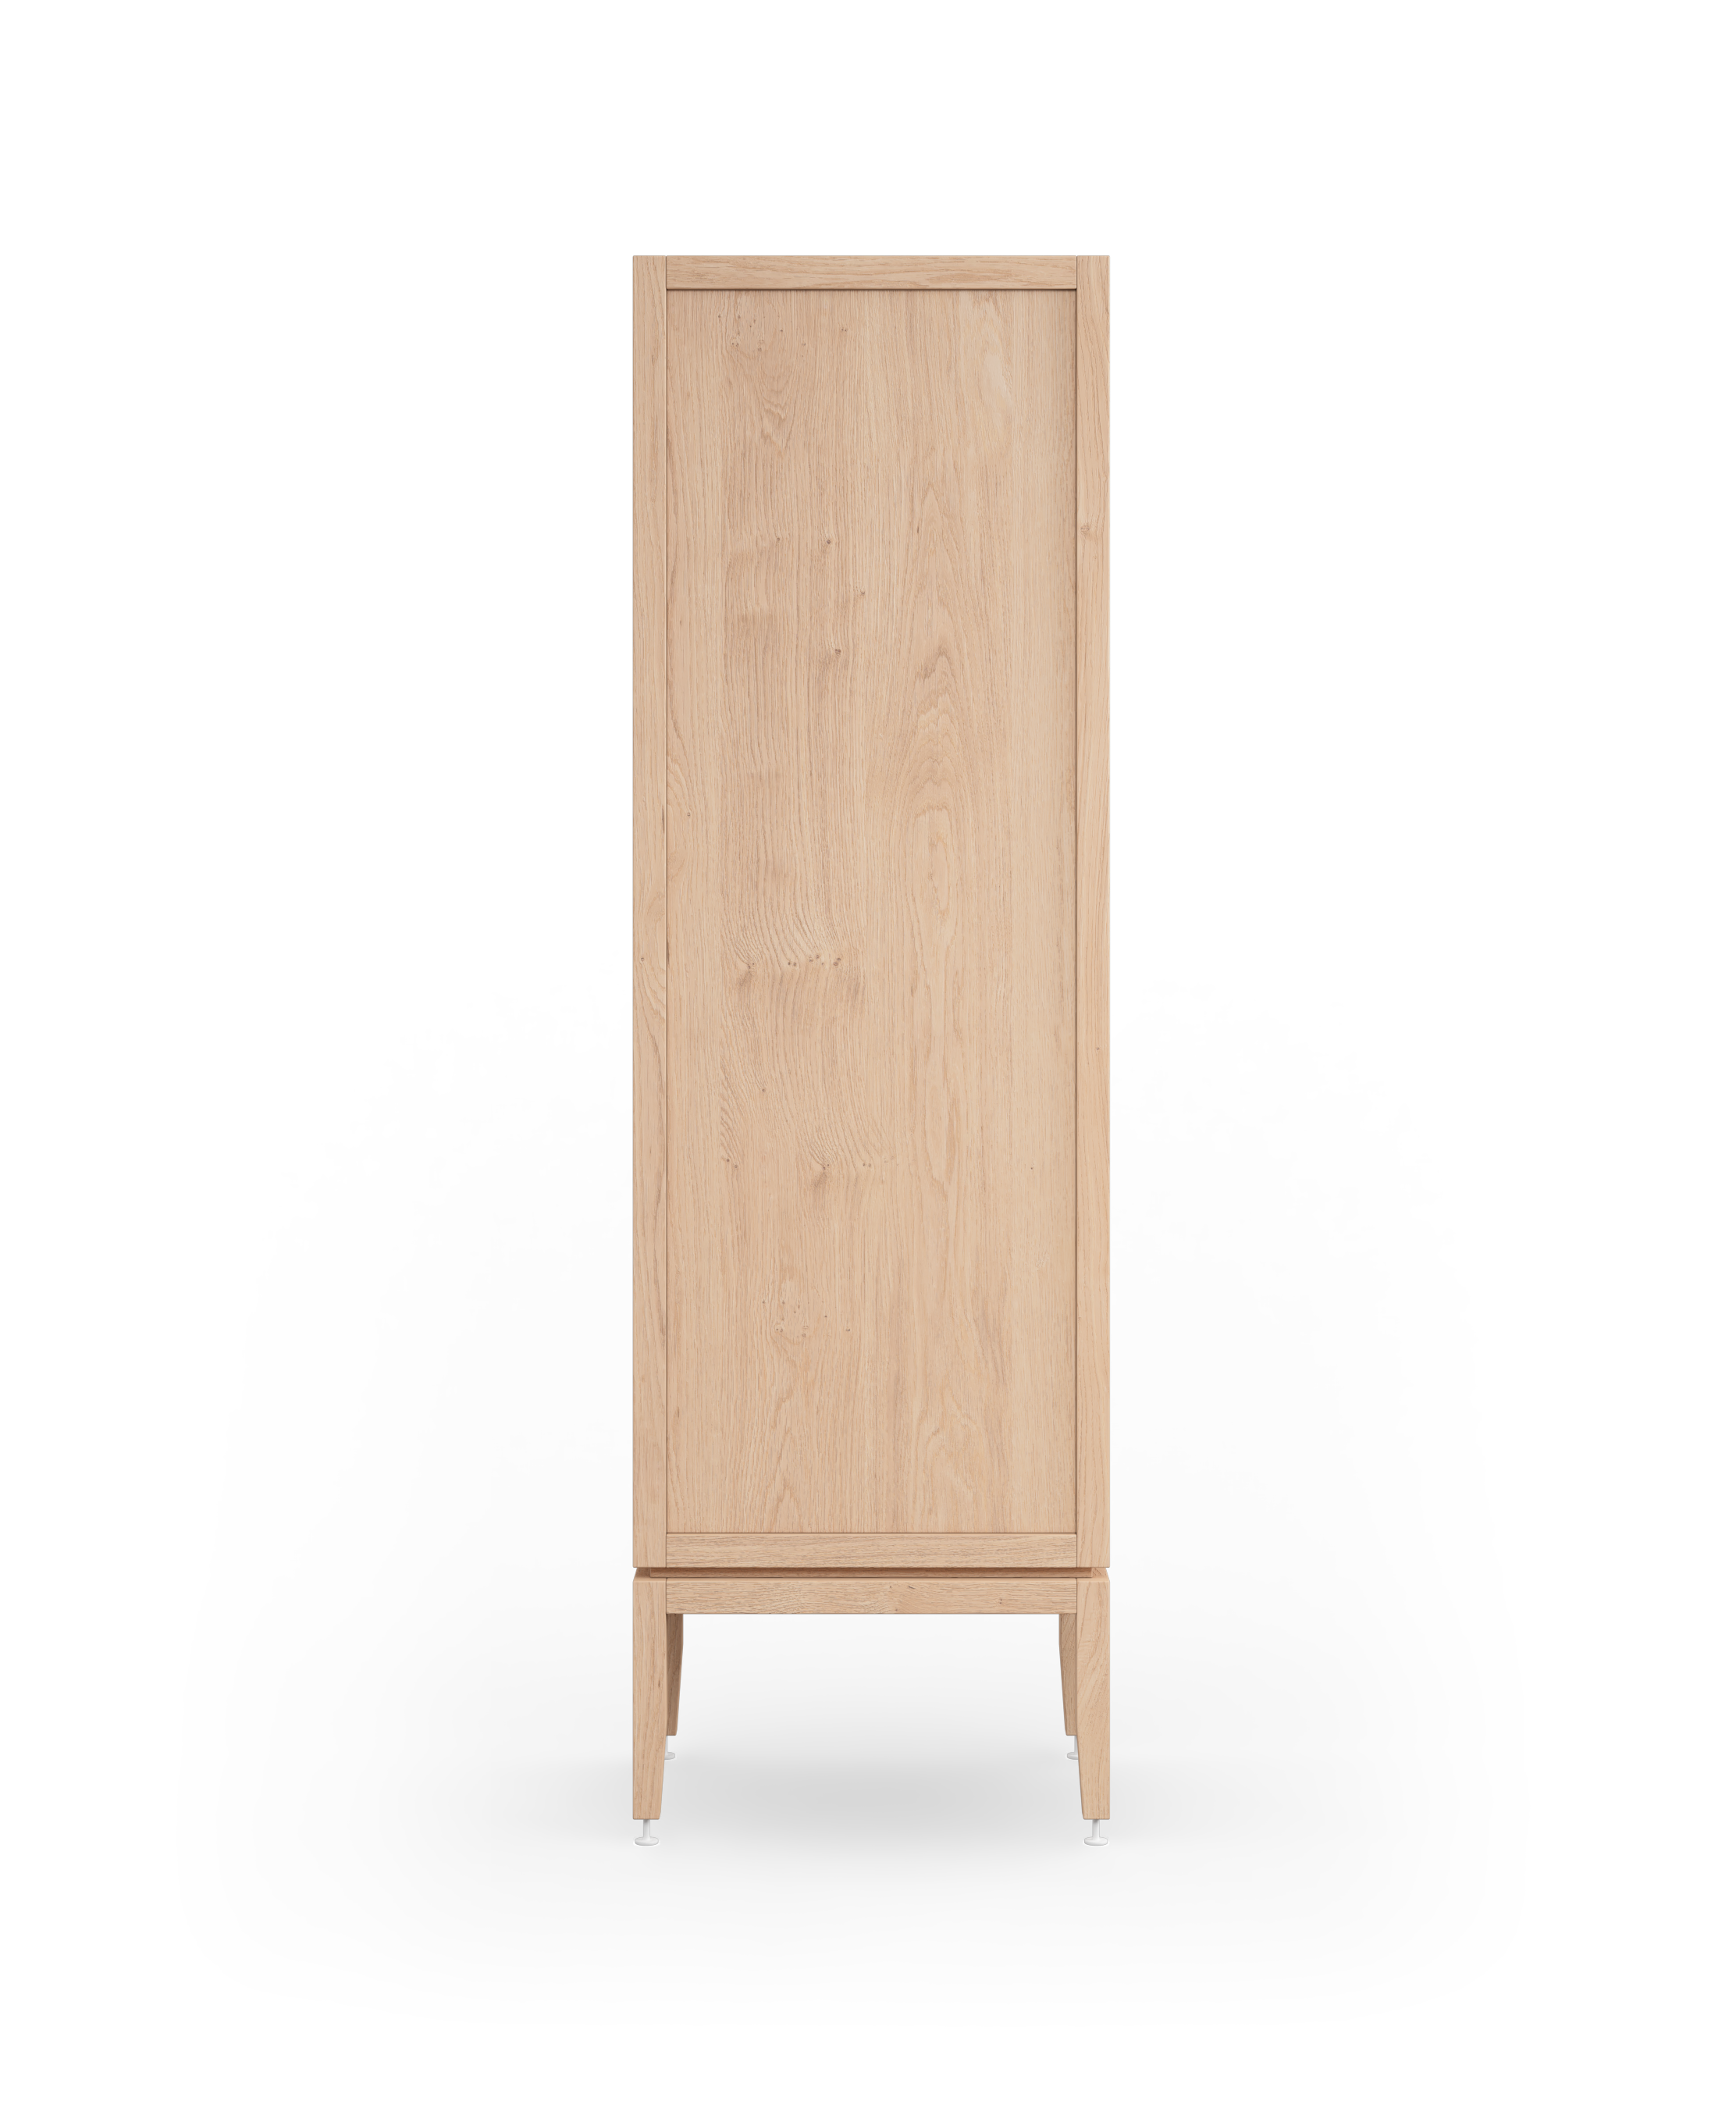 Coquo modular bathroom dresser with one door and two drawers in natural oak with metal handles.